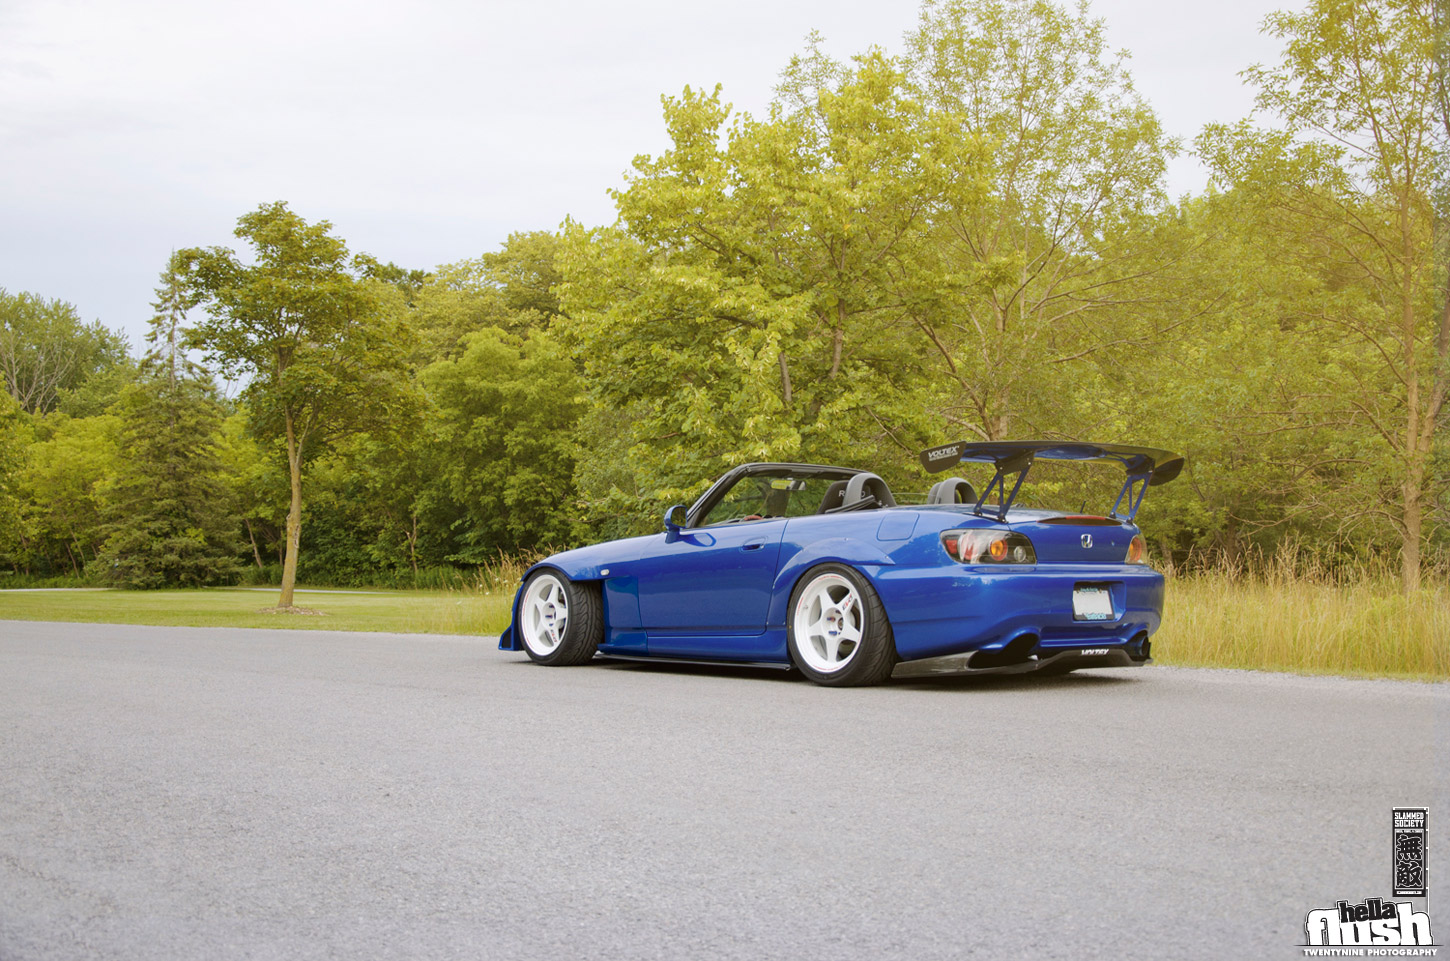 Since its debut in 1999, the Honda S2000 became an iconic success story for...